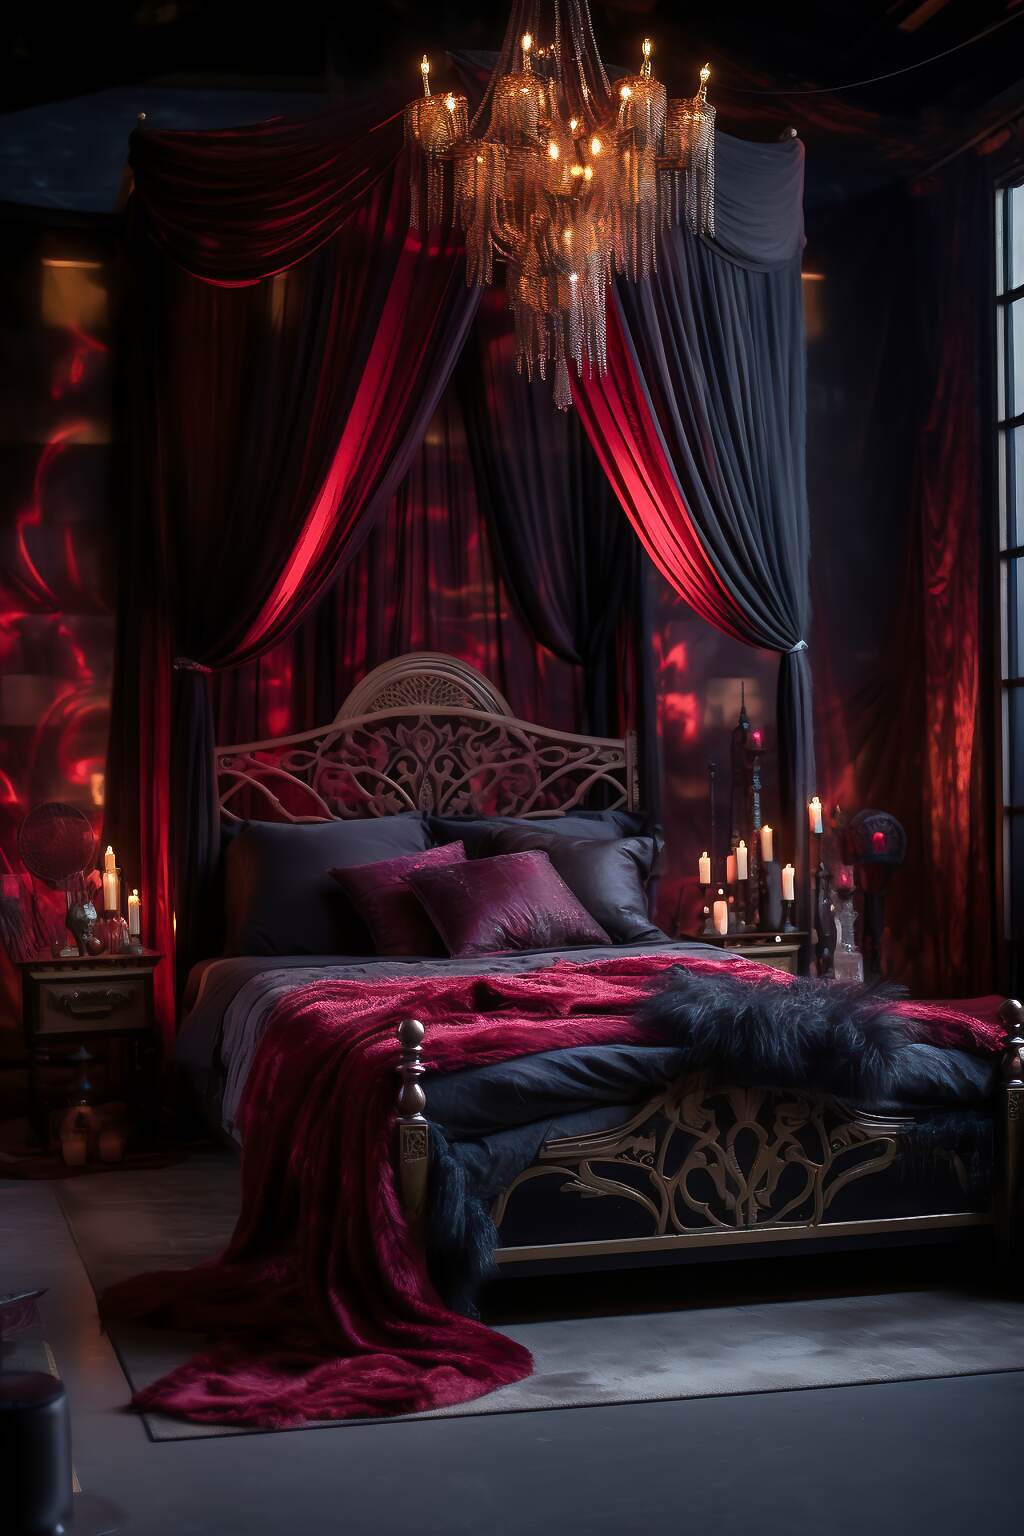 Large Dark Boho Bedroom With A Black &Amp; Red Color Scheme, Featuring Shadow Art, Velvet Drapes, And Gothic Chandelier, Creating An Intense And Mysterious Atmosphere.